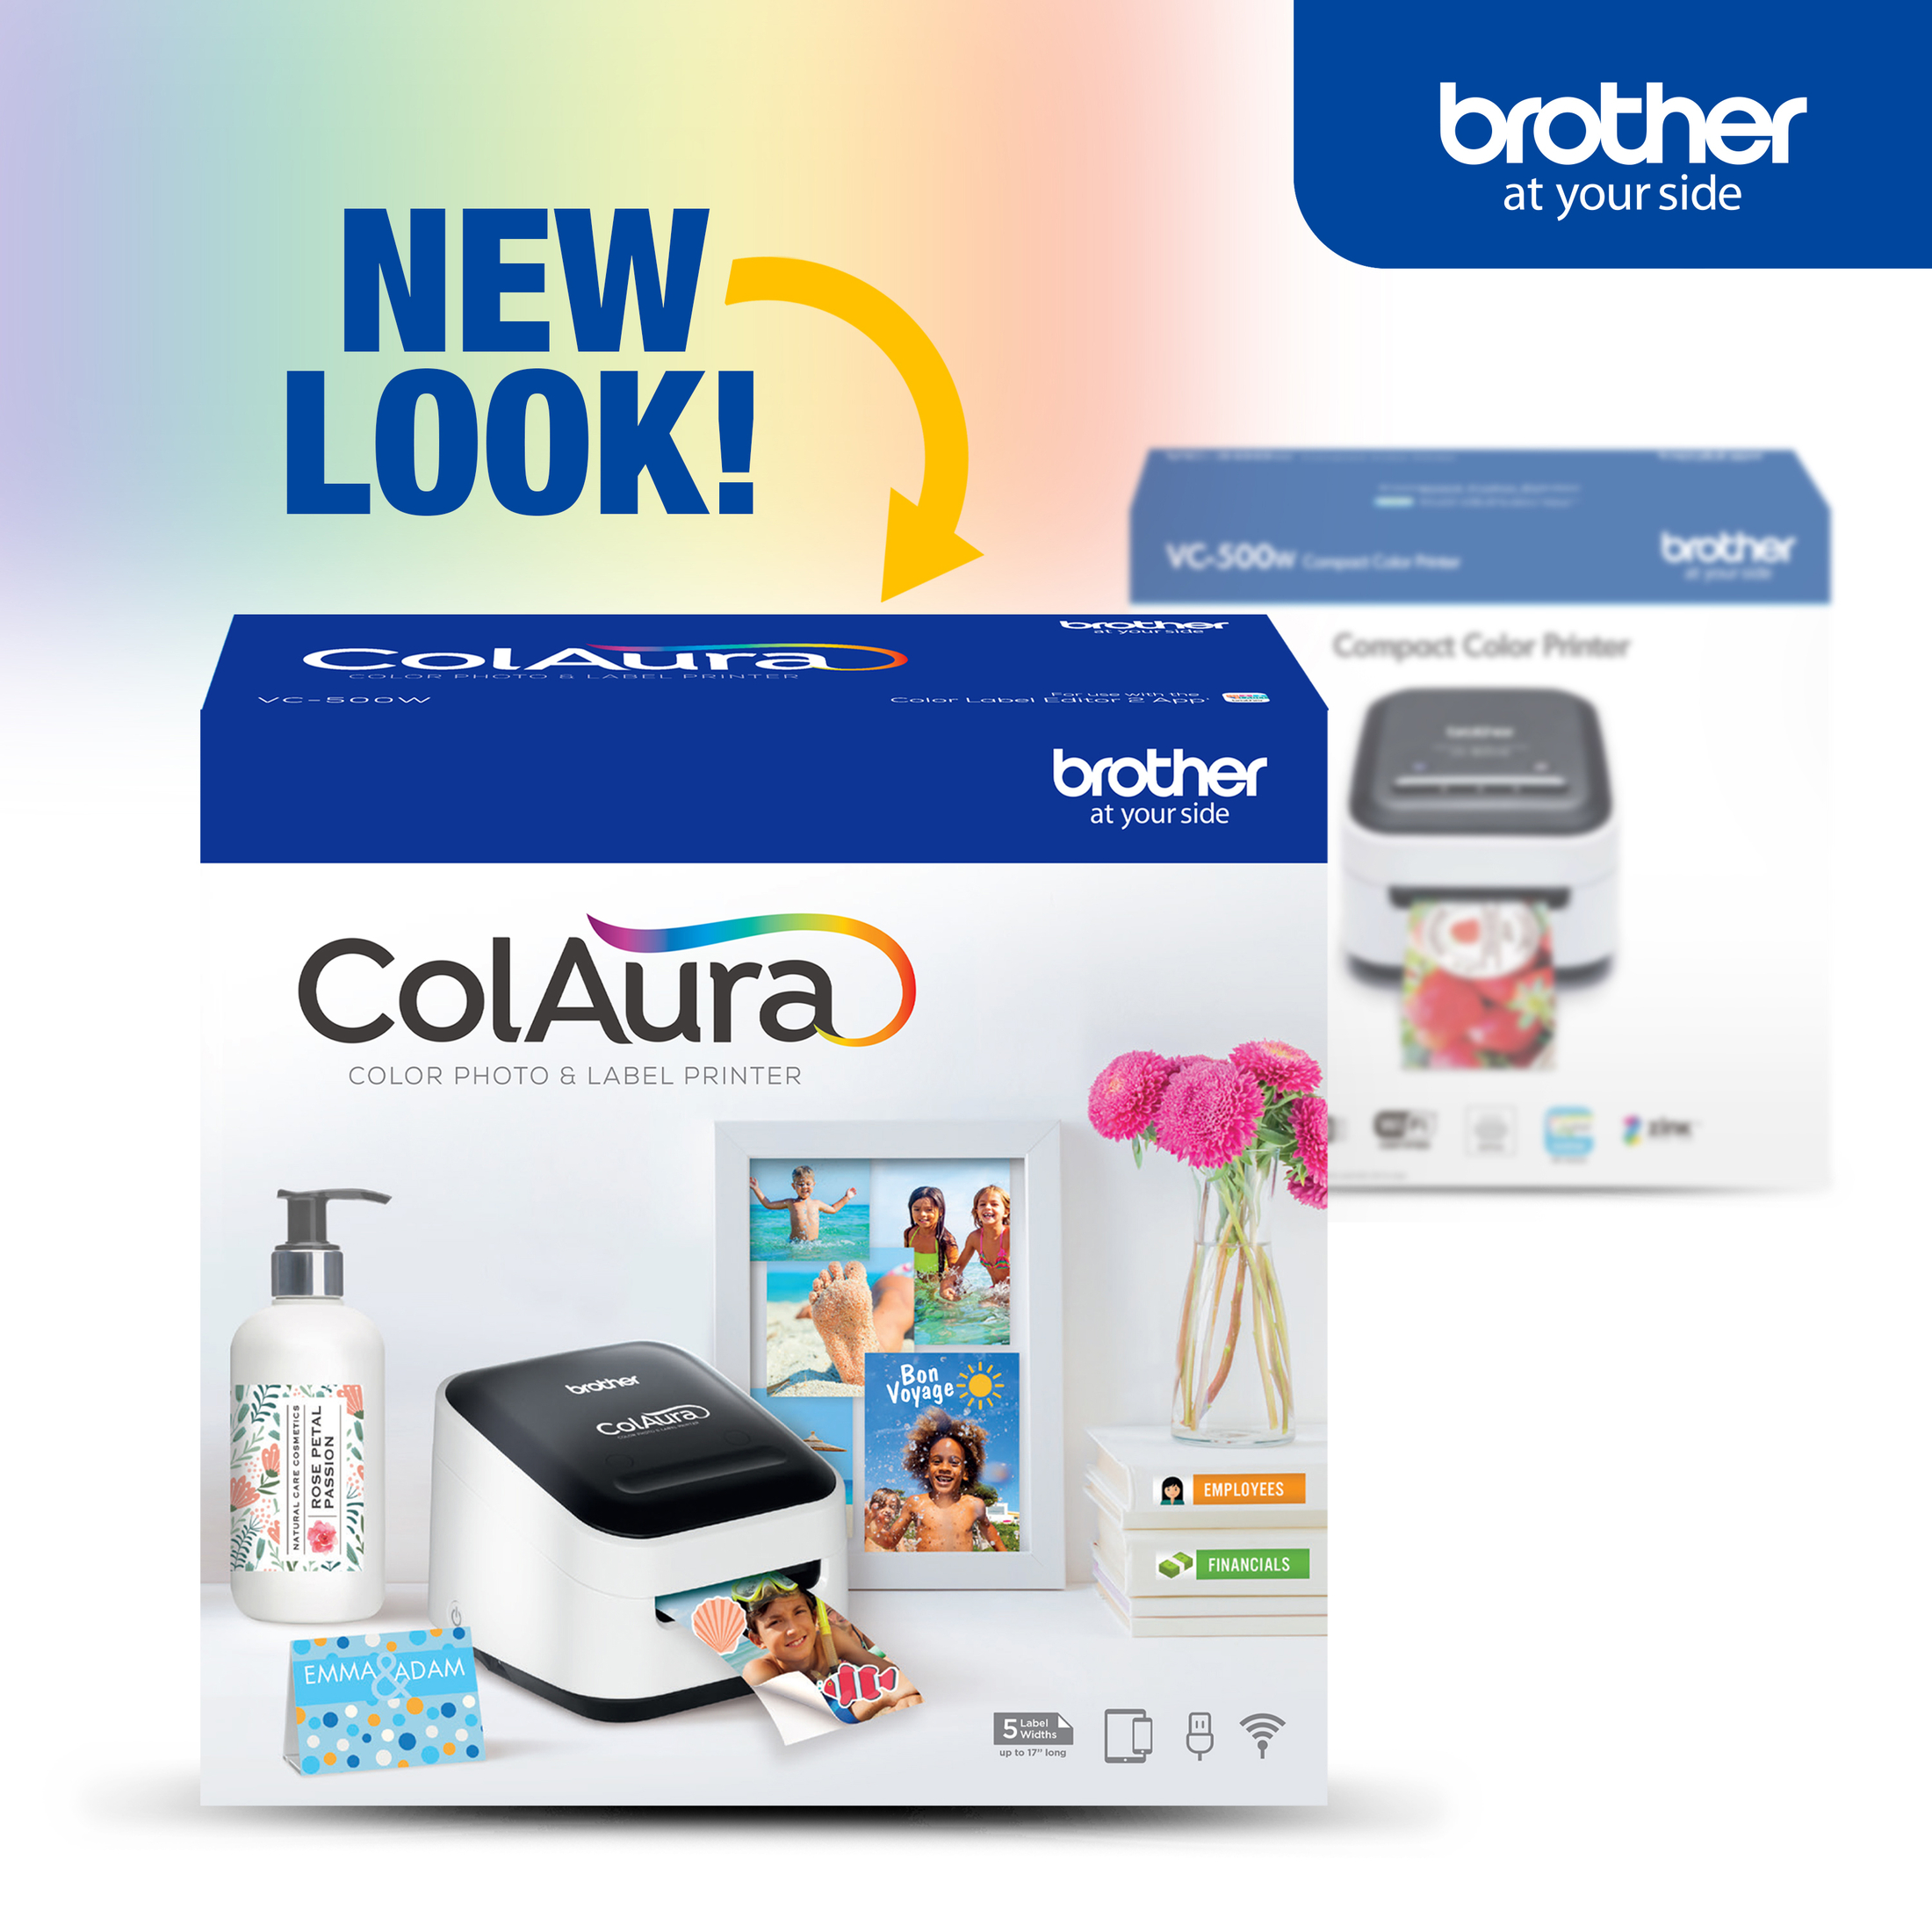 Brother ColAura Color Photo and Label Printer - image 4 of 9